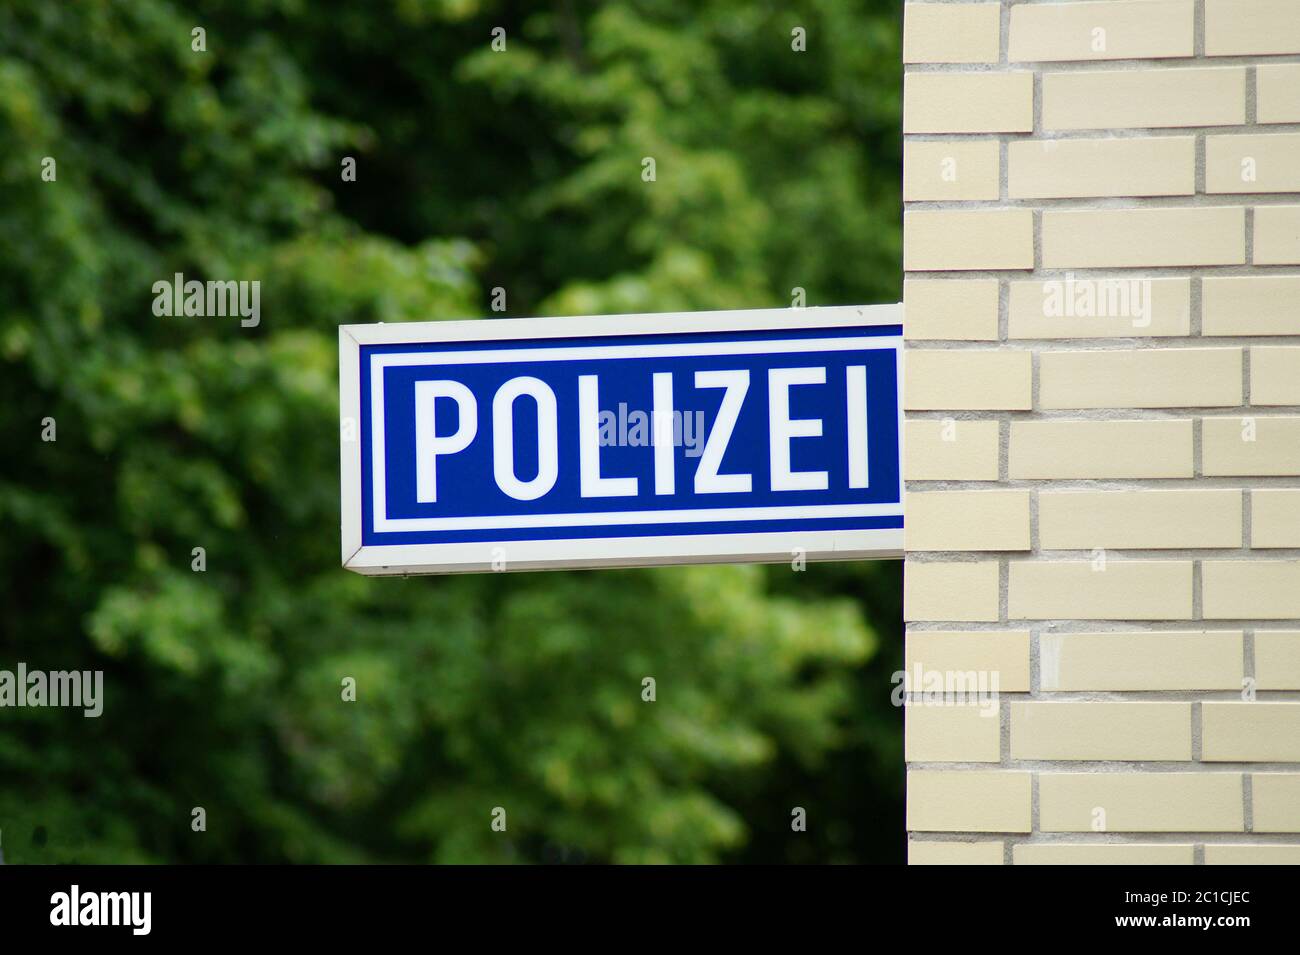 Police station with visible sign Stock Photo